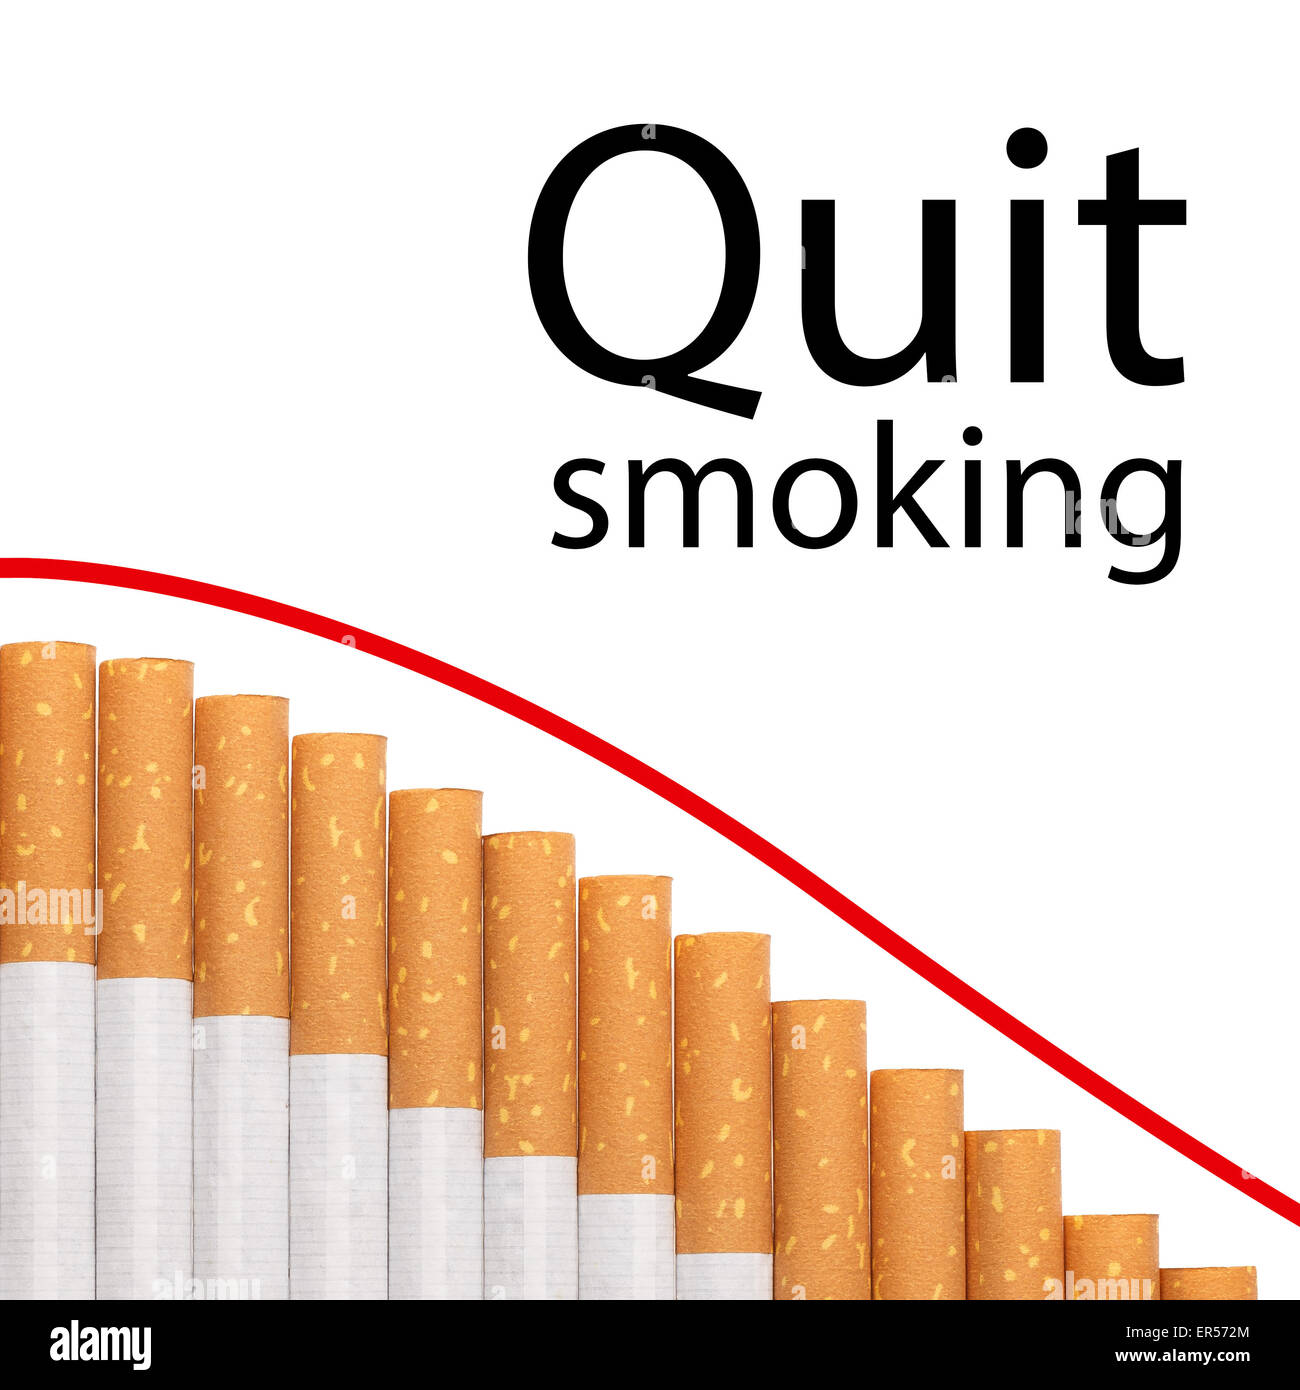 Quit smoking text with a graph of cigarettes and a red down trend line. Stock Photo